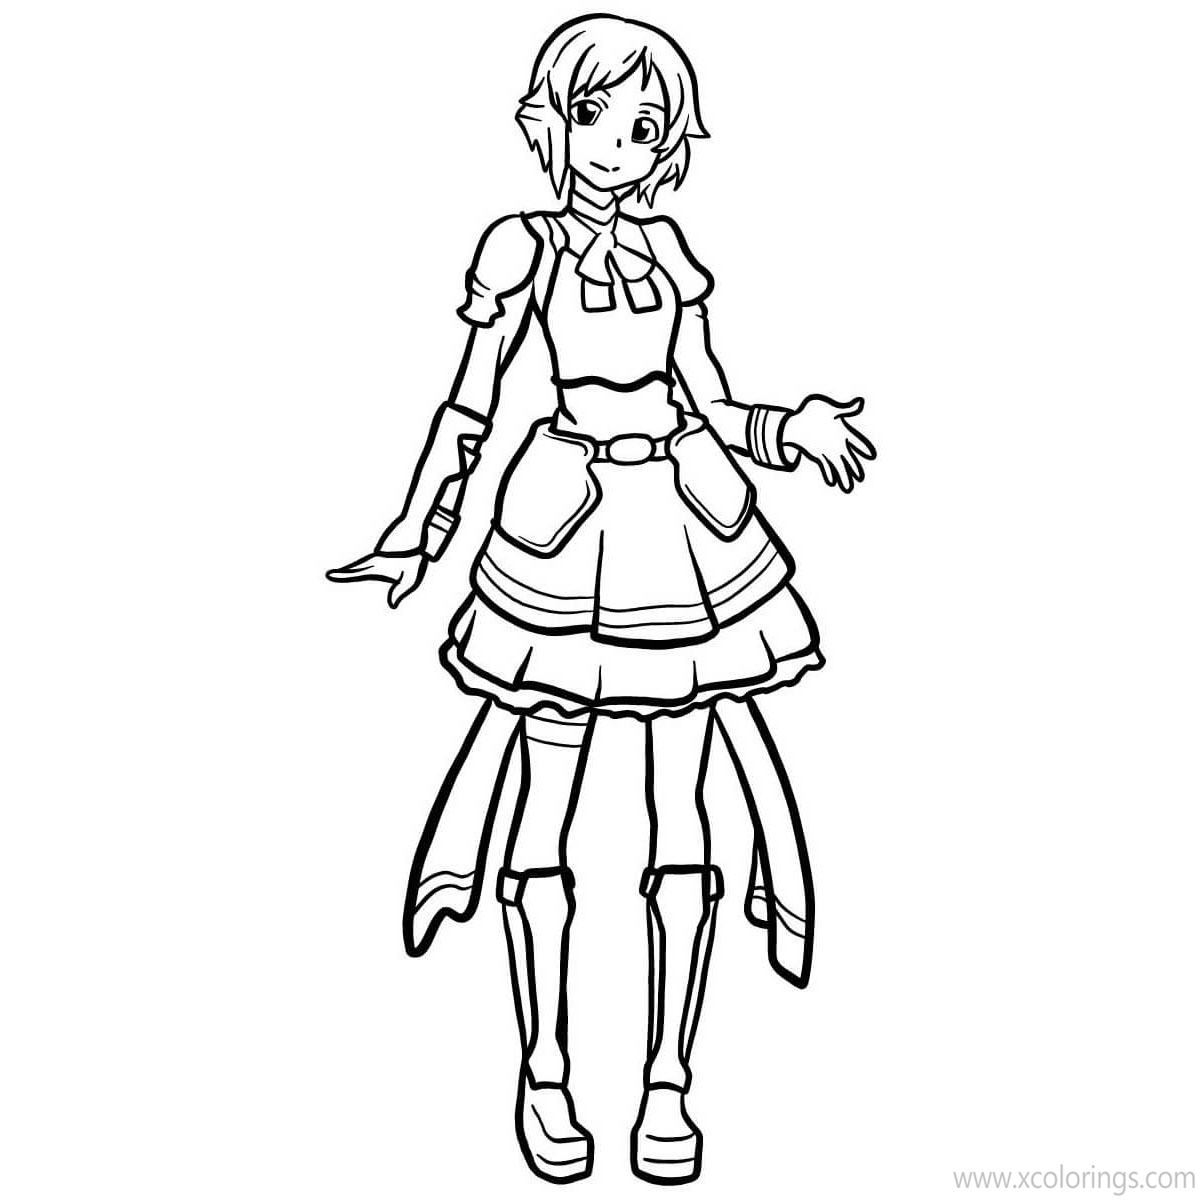 Free Sword Art Online Coloring Pages Lisbeth printable